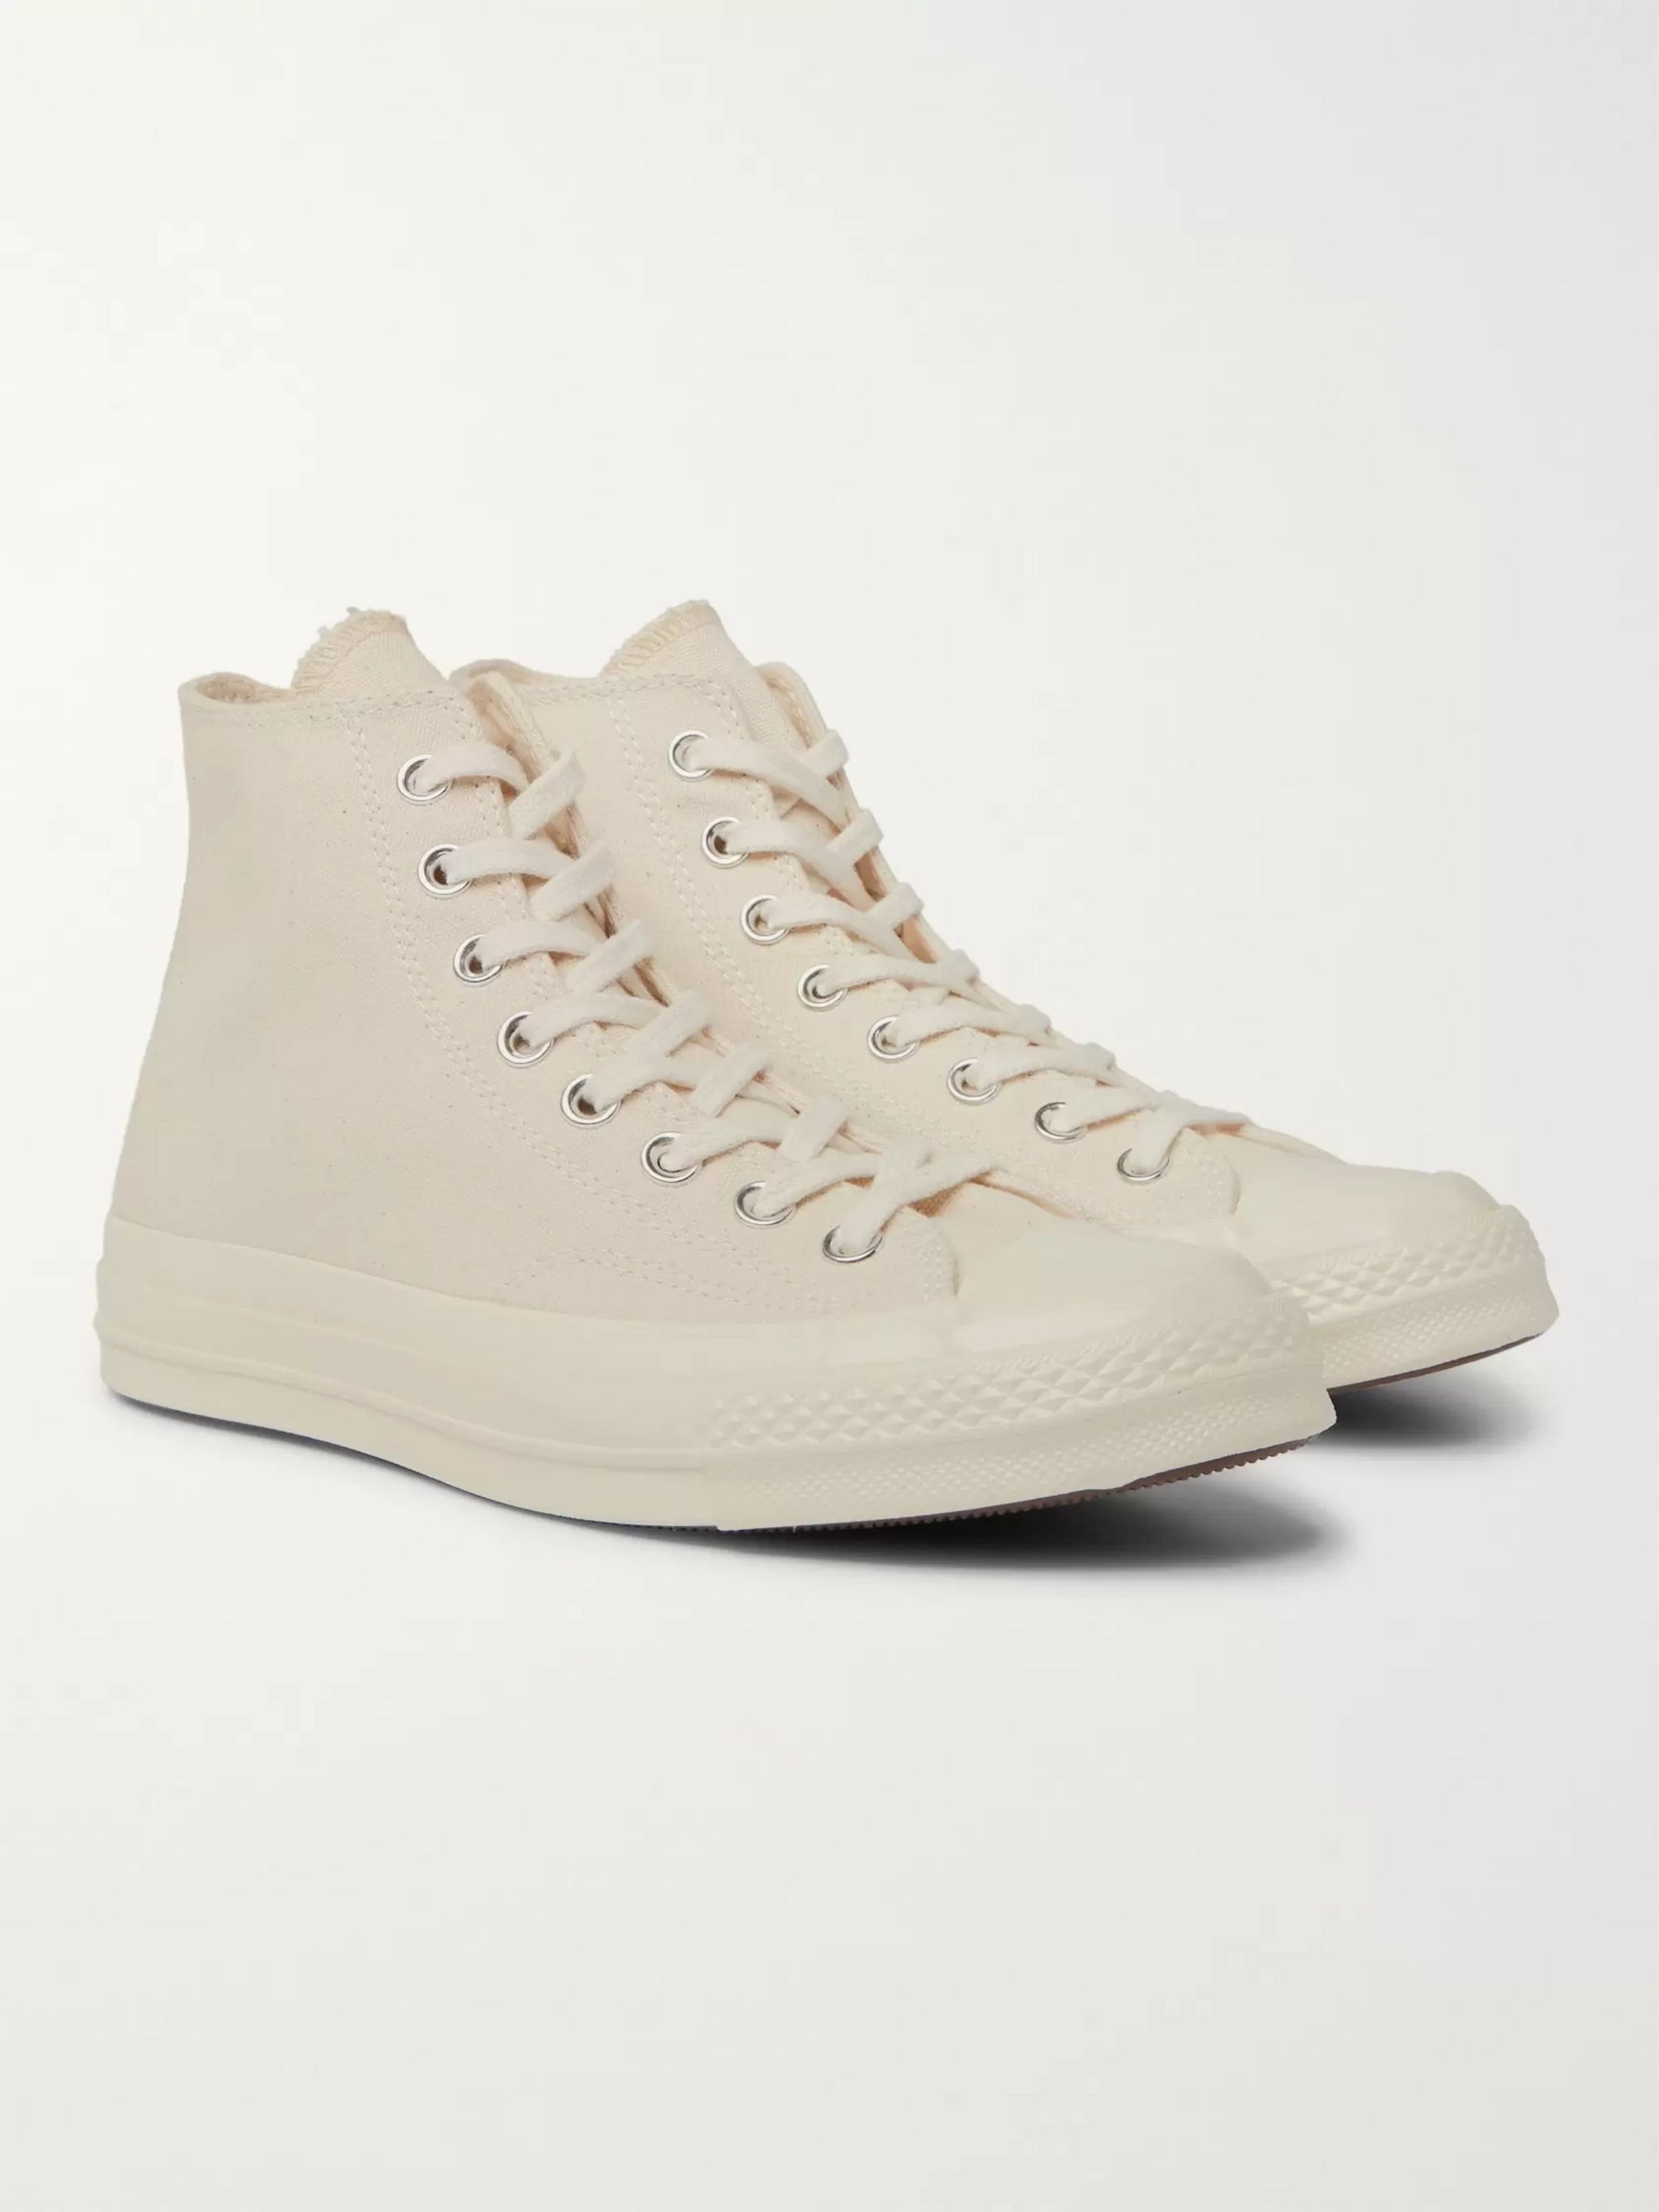 cream leather converse high tops